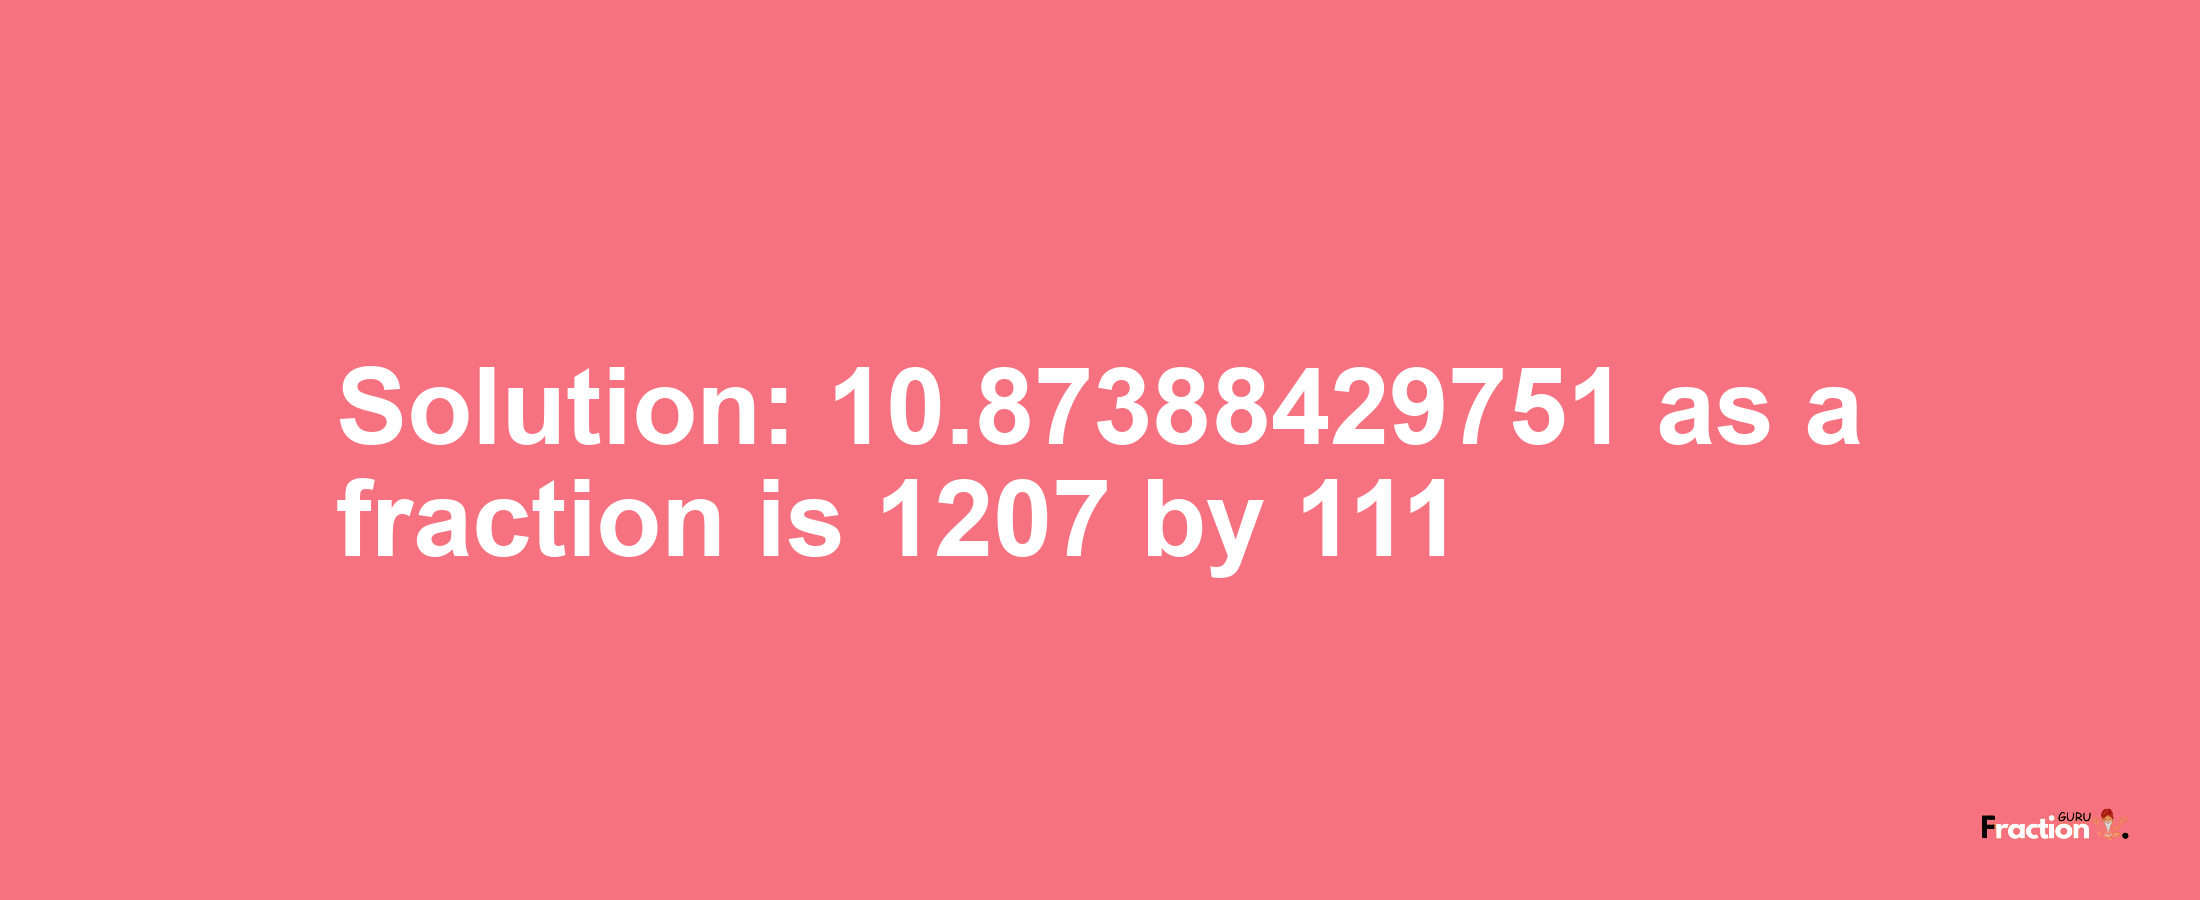 Solution:10.87388429751 as a fraction is 1207/111